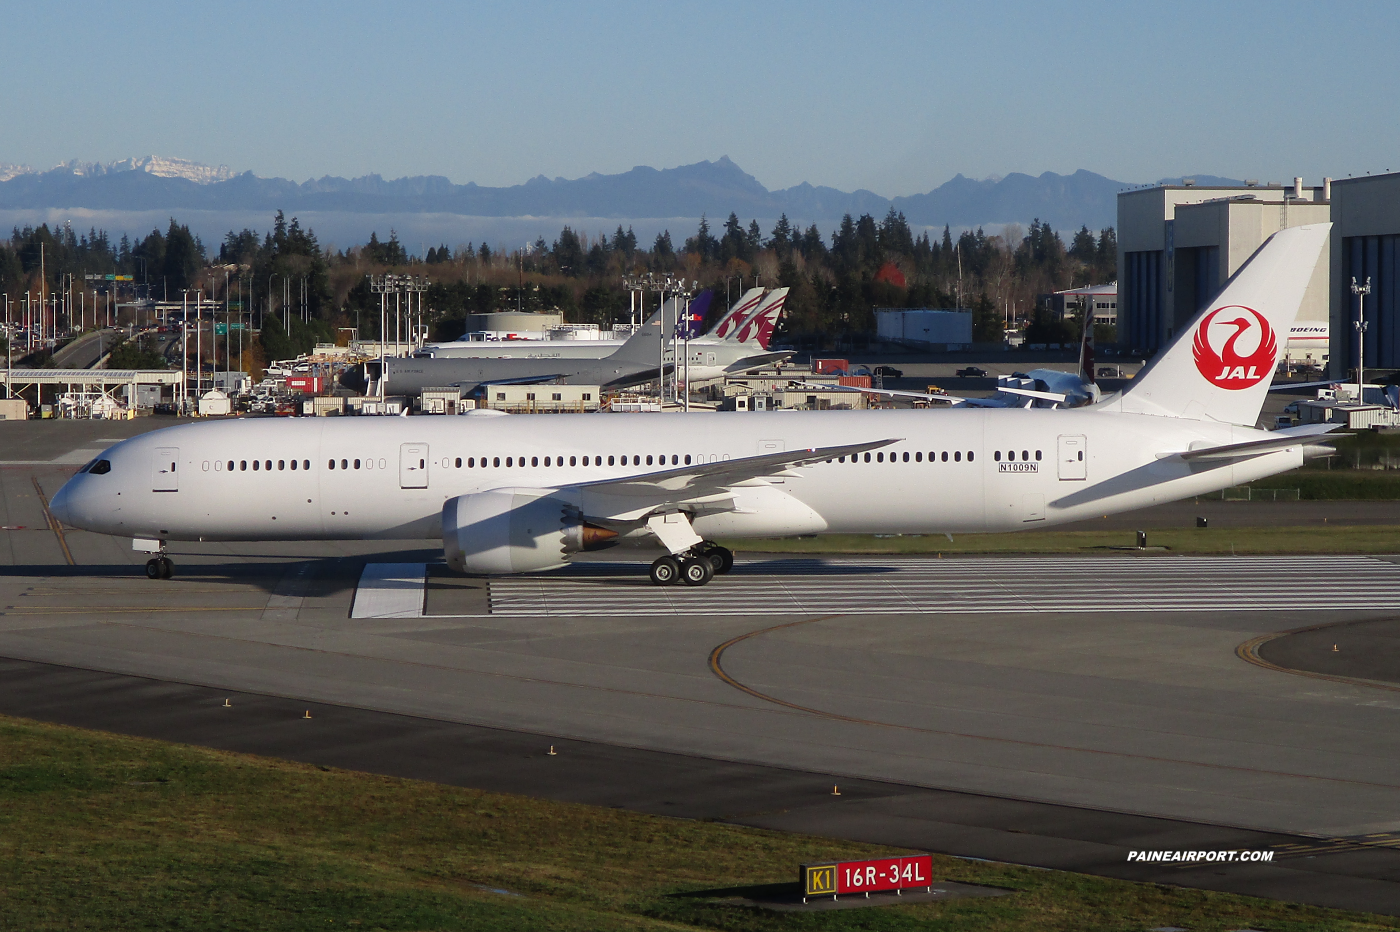 Japan Airlines 787-9 line 945 at Paine Field